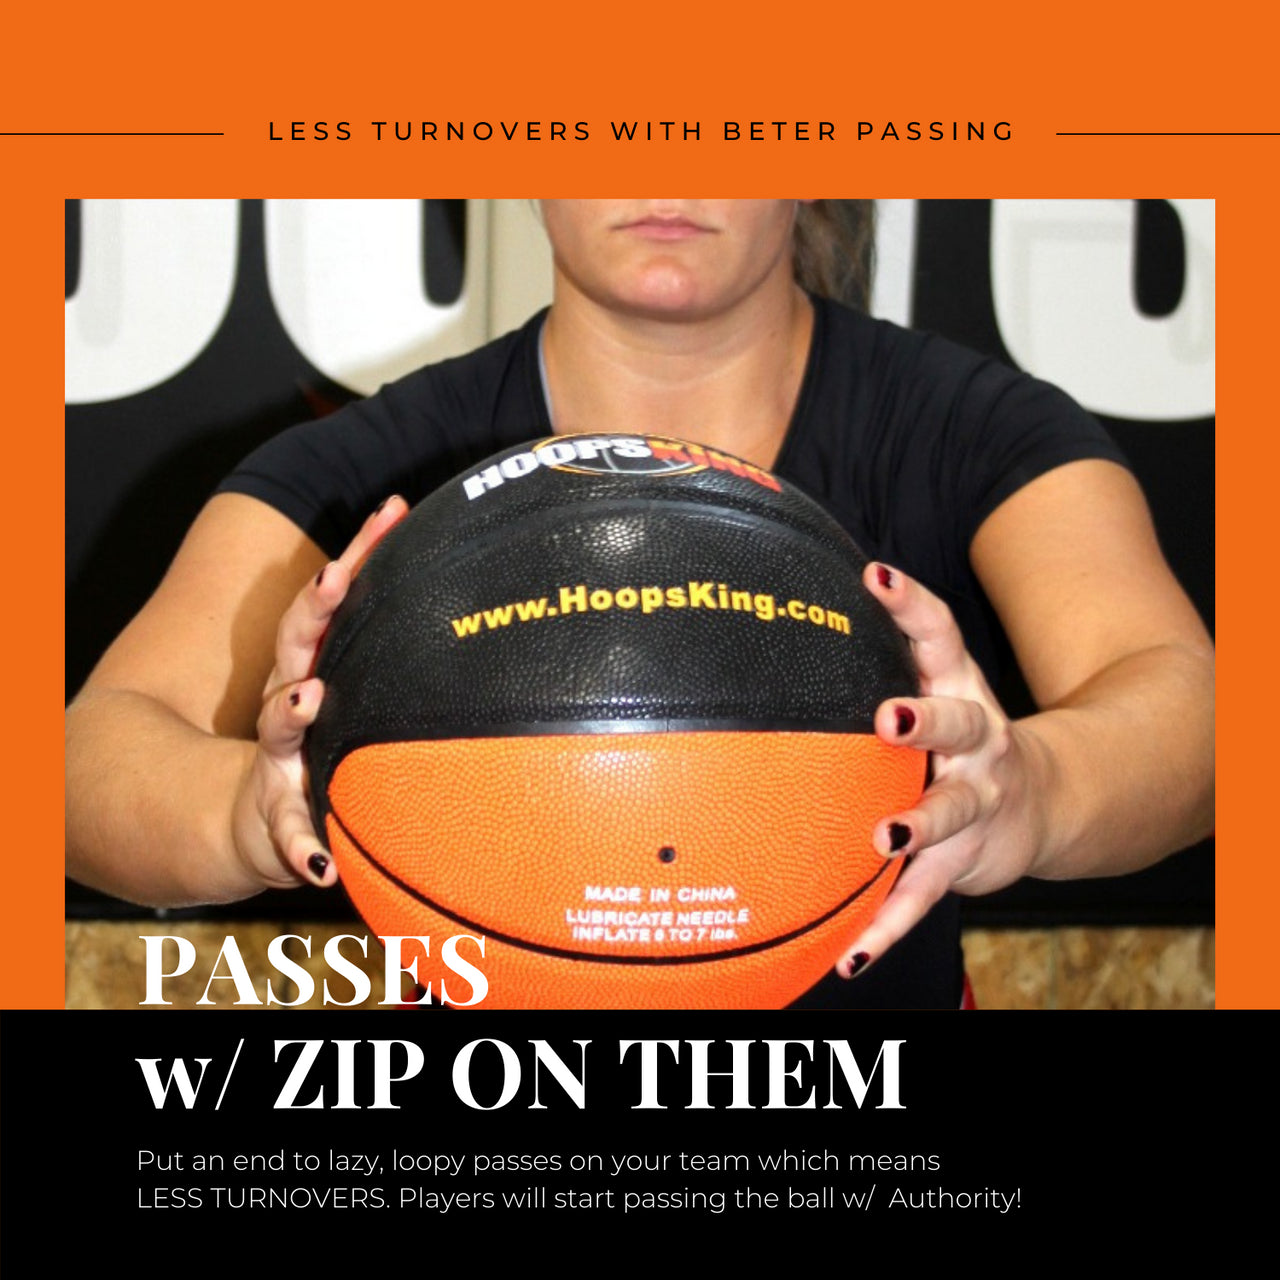 weighted basketball for passing drills